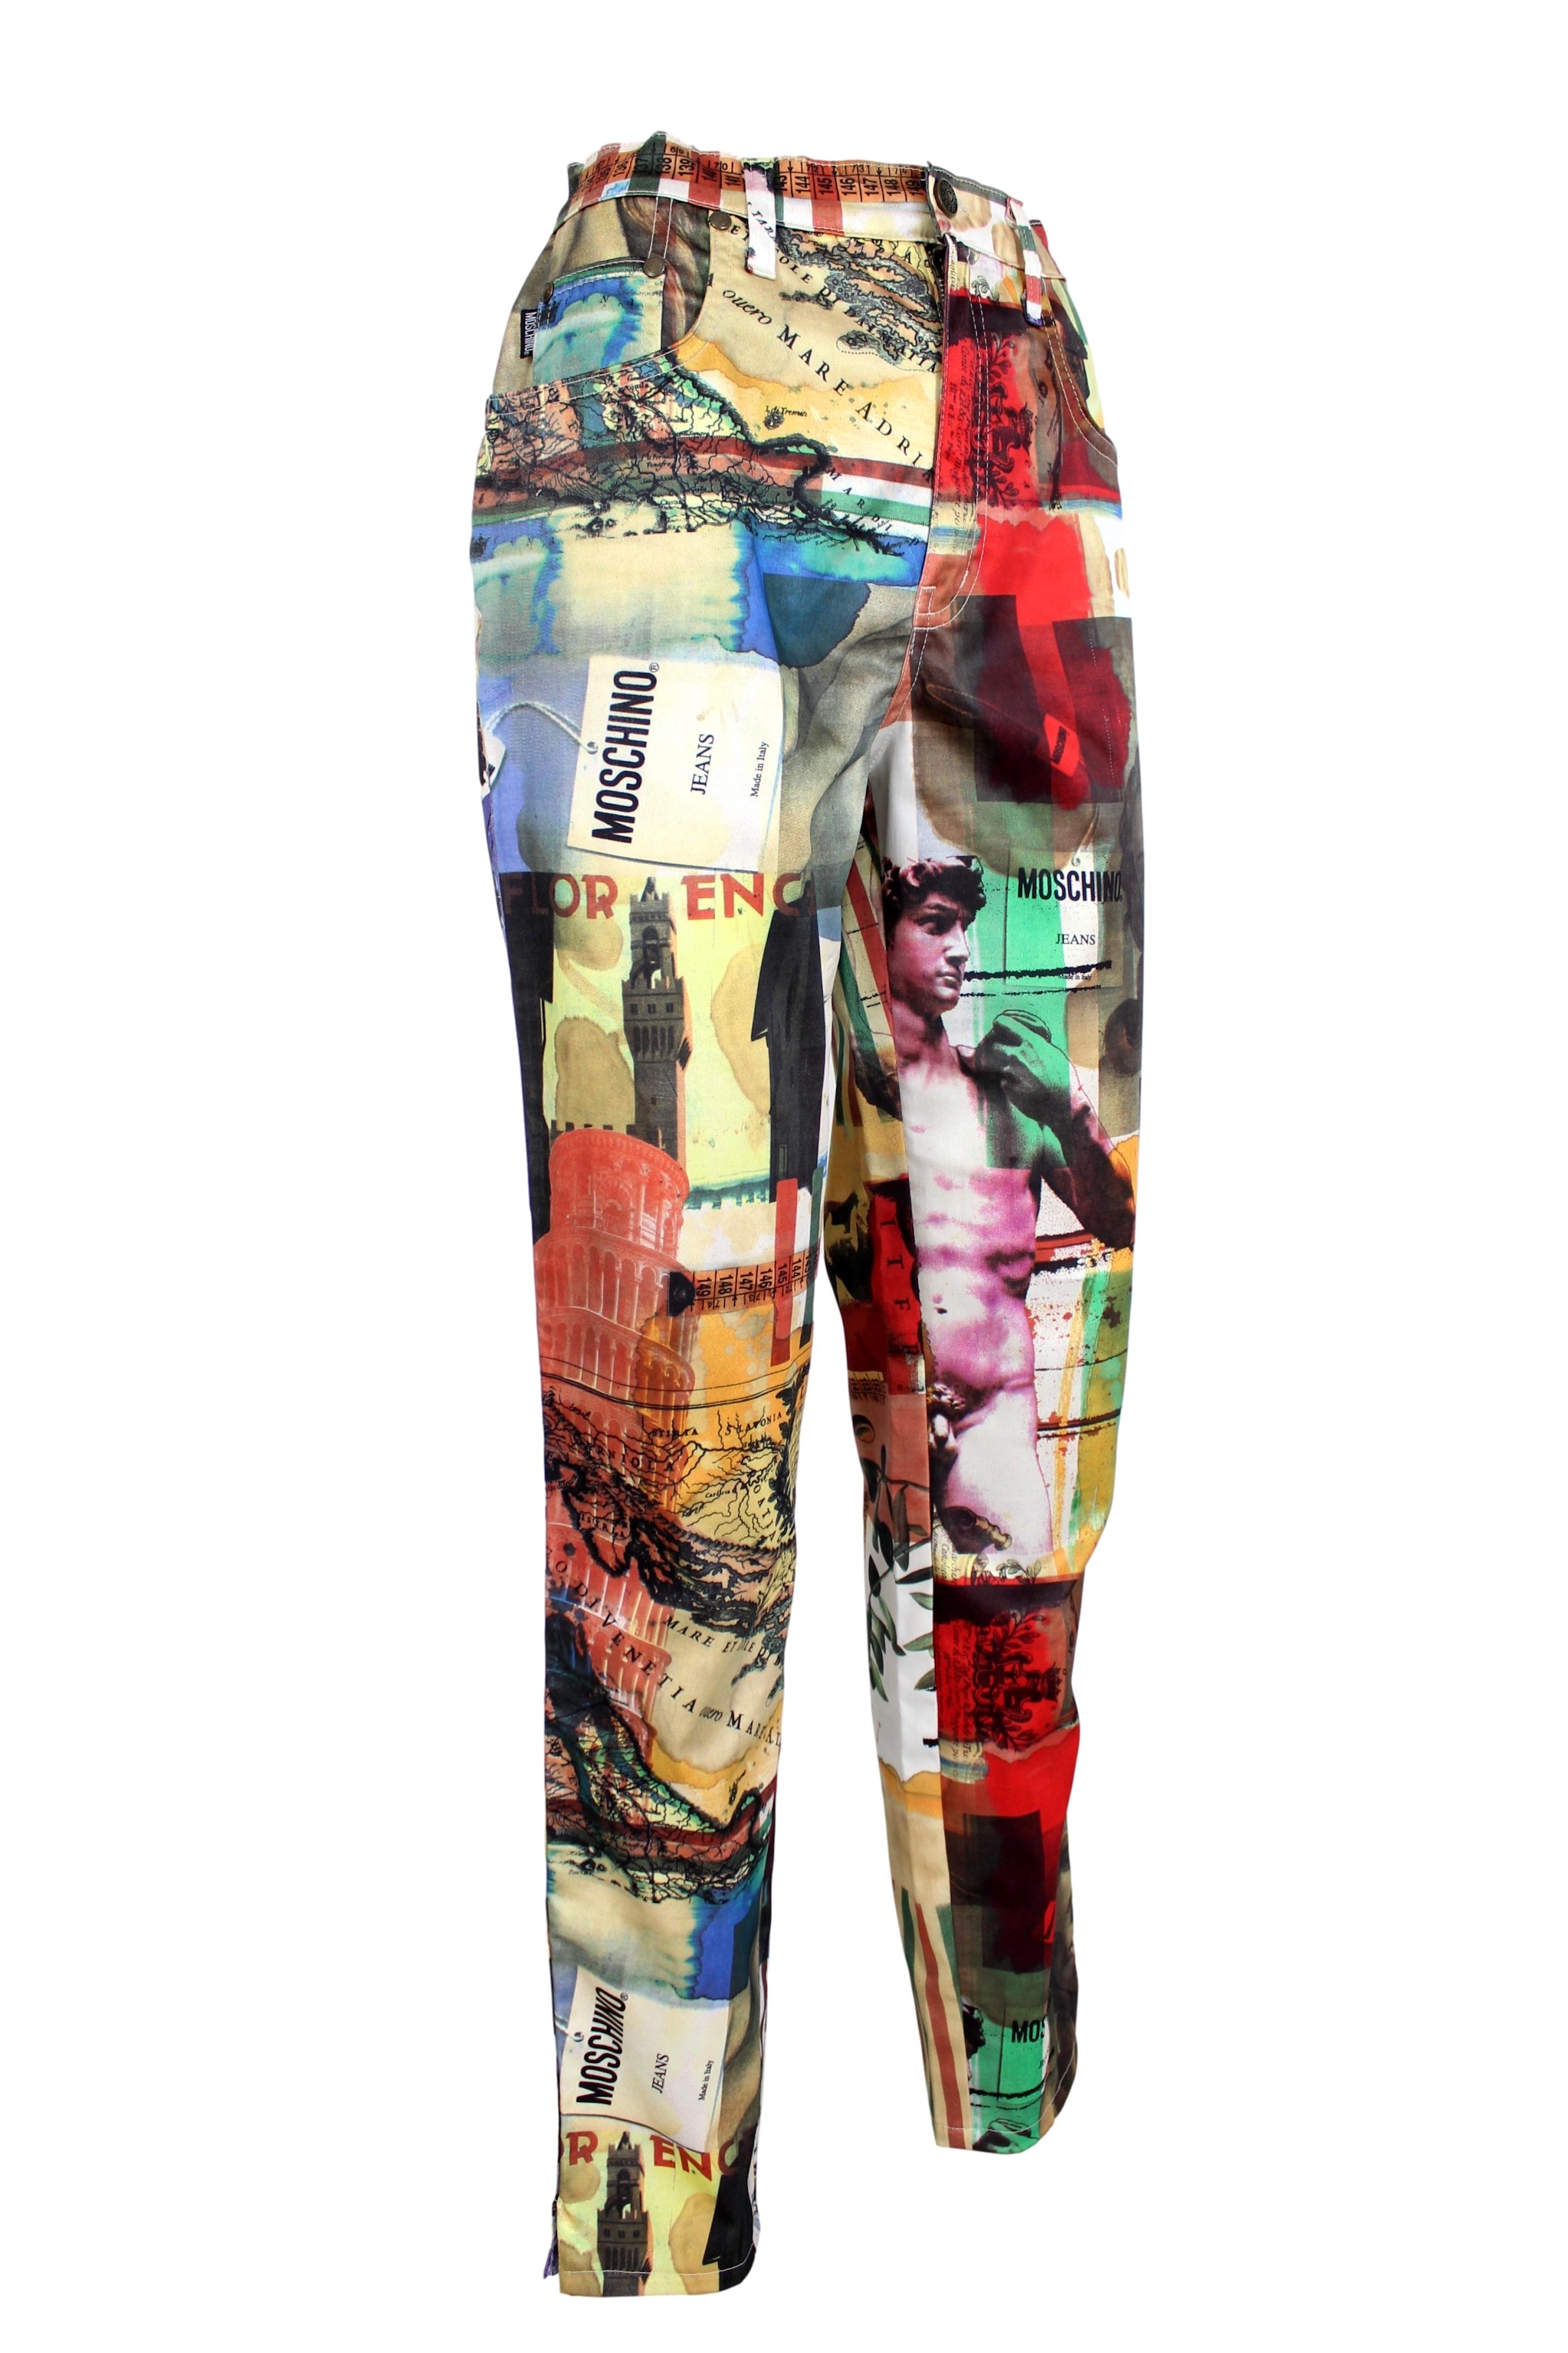 Moschino Jeans 90s women's trousers. Iconic trousers depicting monuments of Tuscany. Bright colors from yellow to red. Classic 5-pocket model. straight leg and high waist. Button and zip closure. 95% polyamide 5% elastane fabric. Made in Italy.